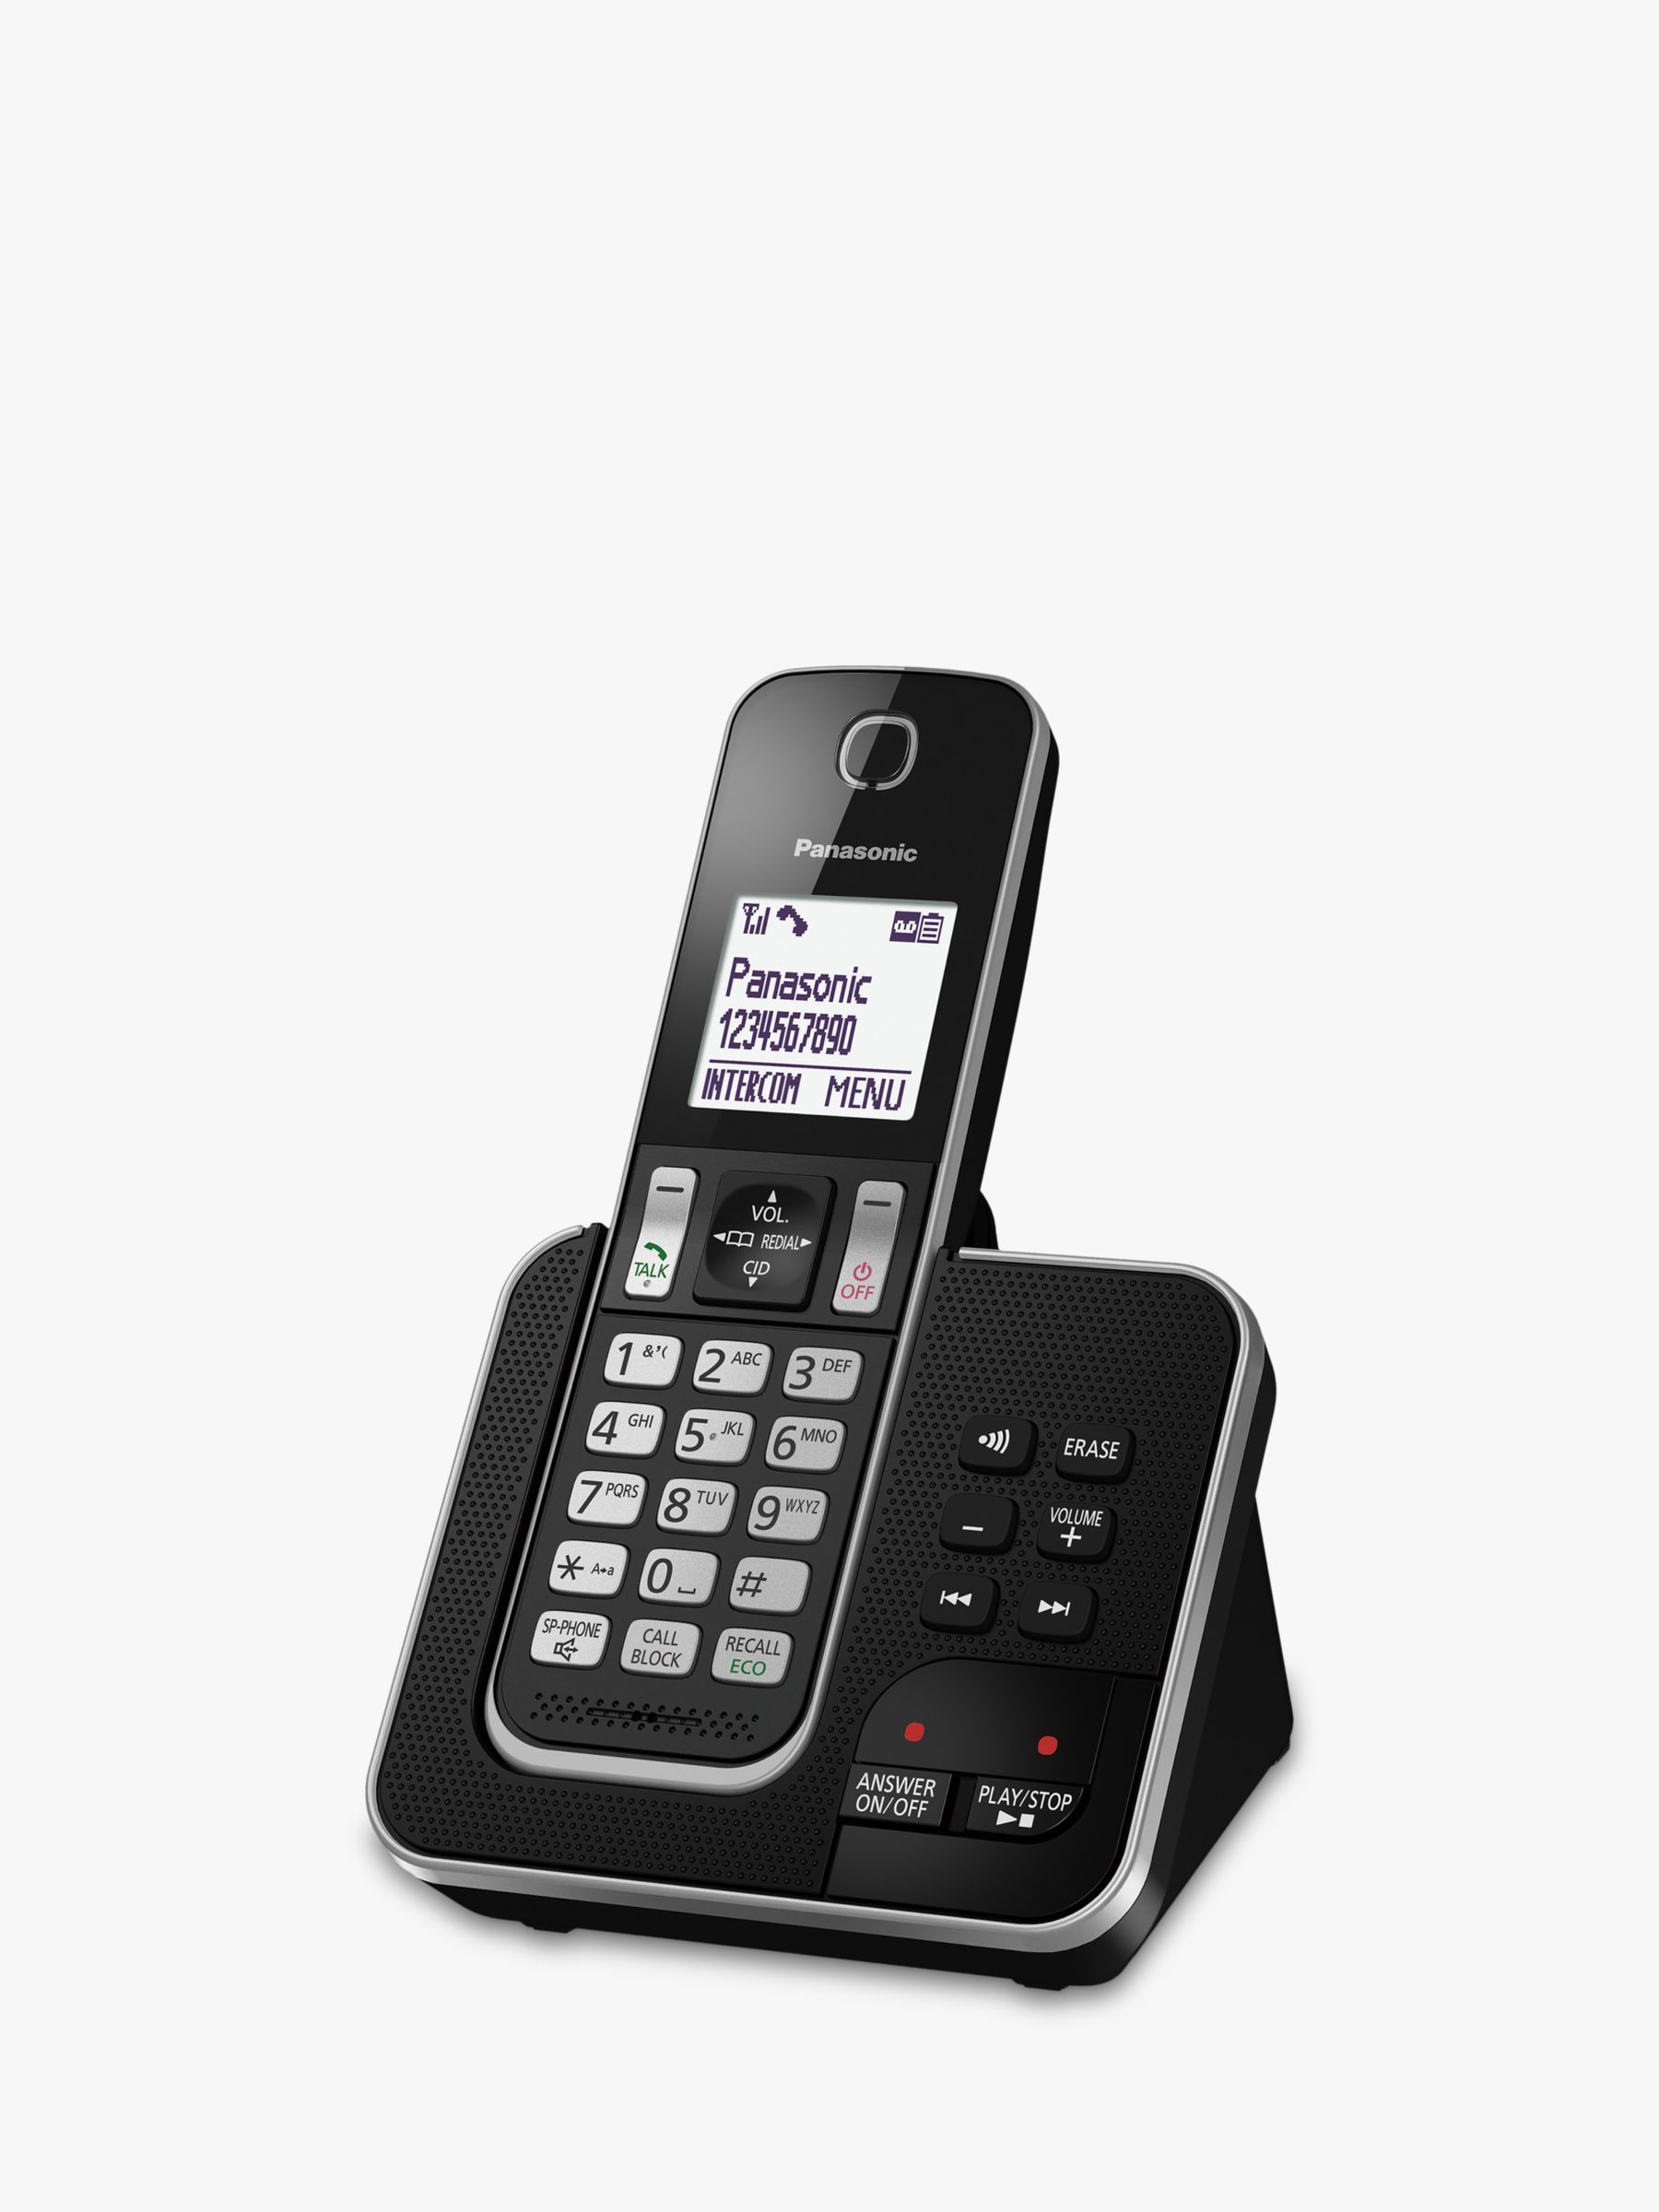 Panasonic KX-TGD620EB Digital Cordless Telephone with Dedicated Nuisance Call Block Button and Answering Machine, Single DECT